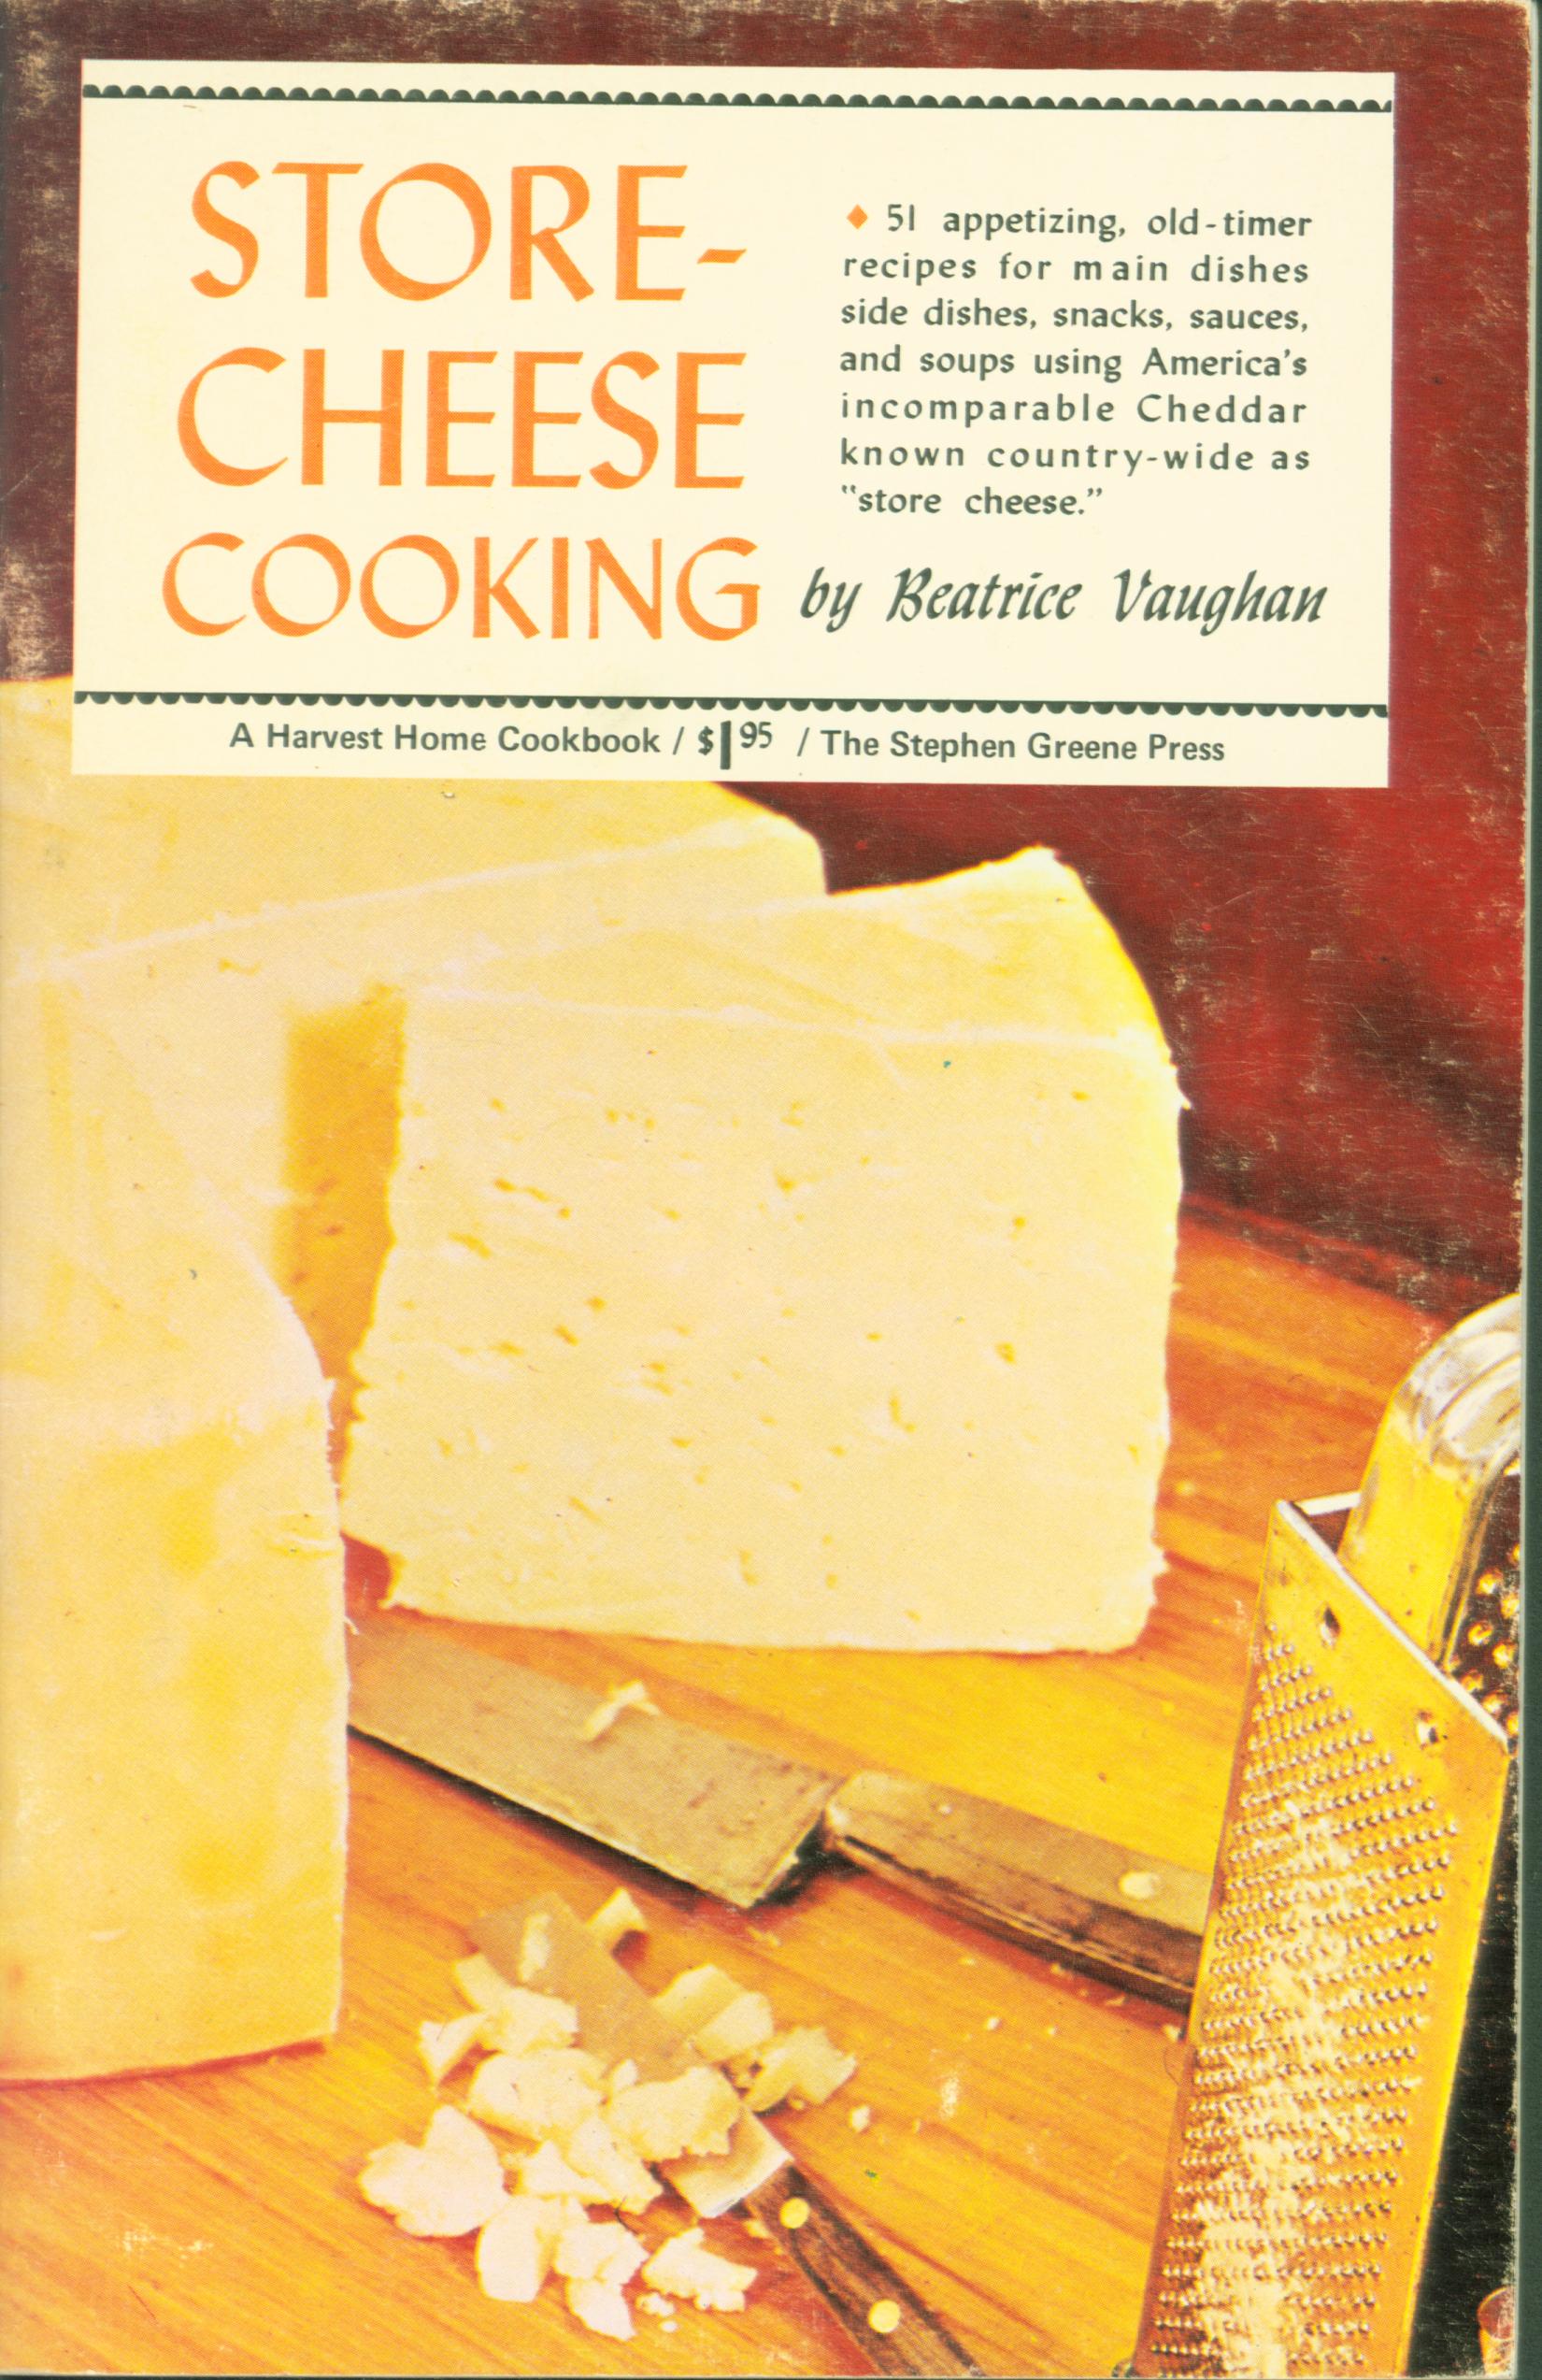 STORE-CHEESE COOKING. 